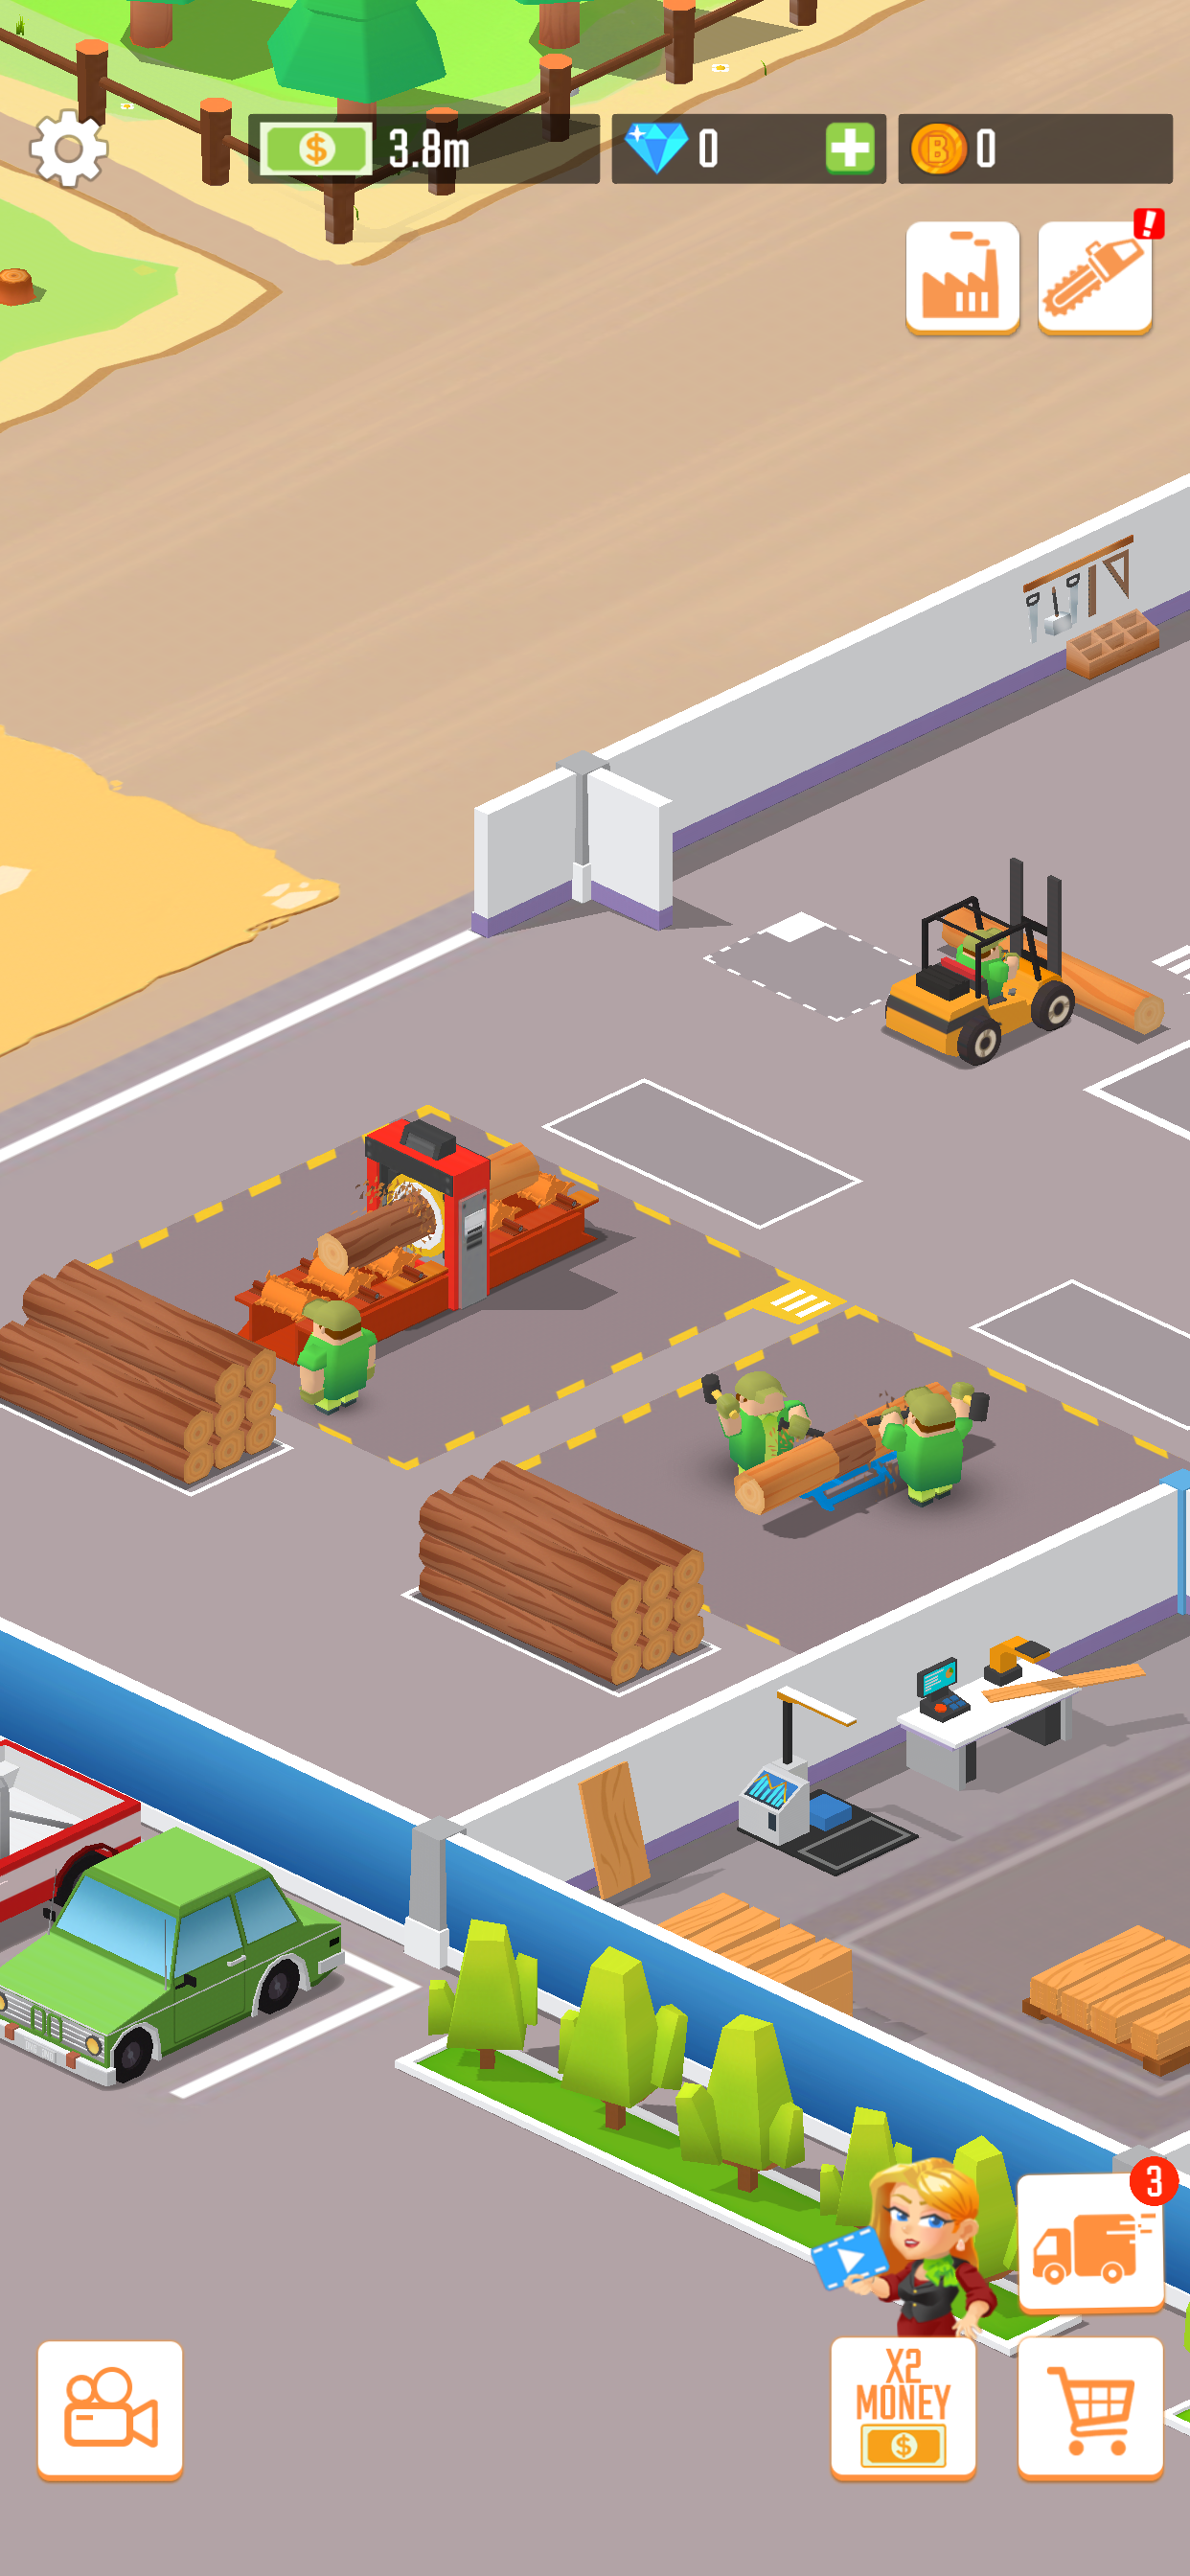 IDLE LUMBER INC - Play Online for Free!